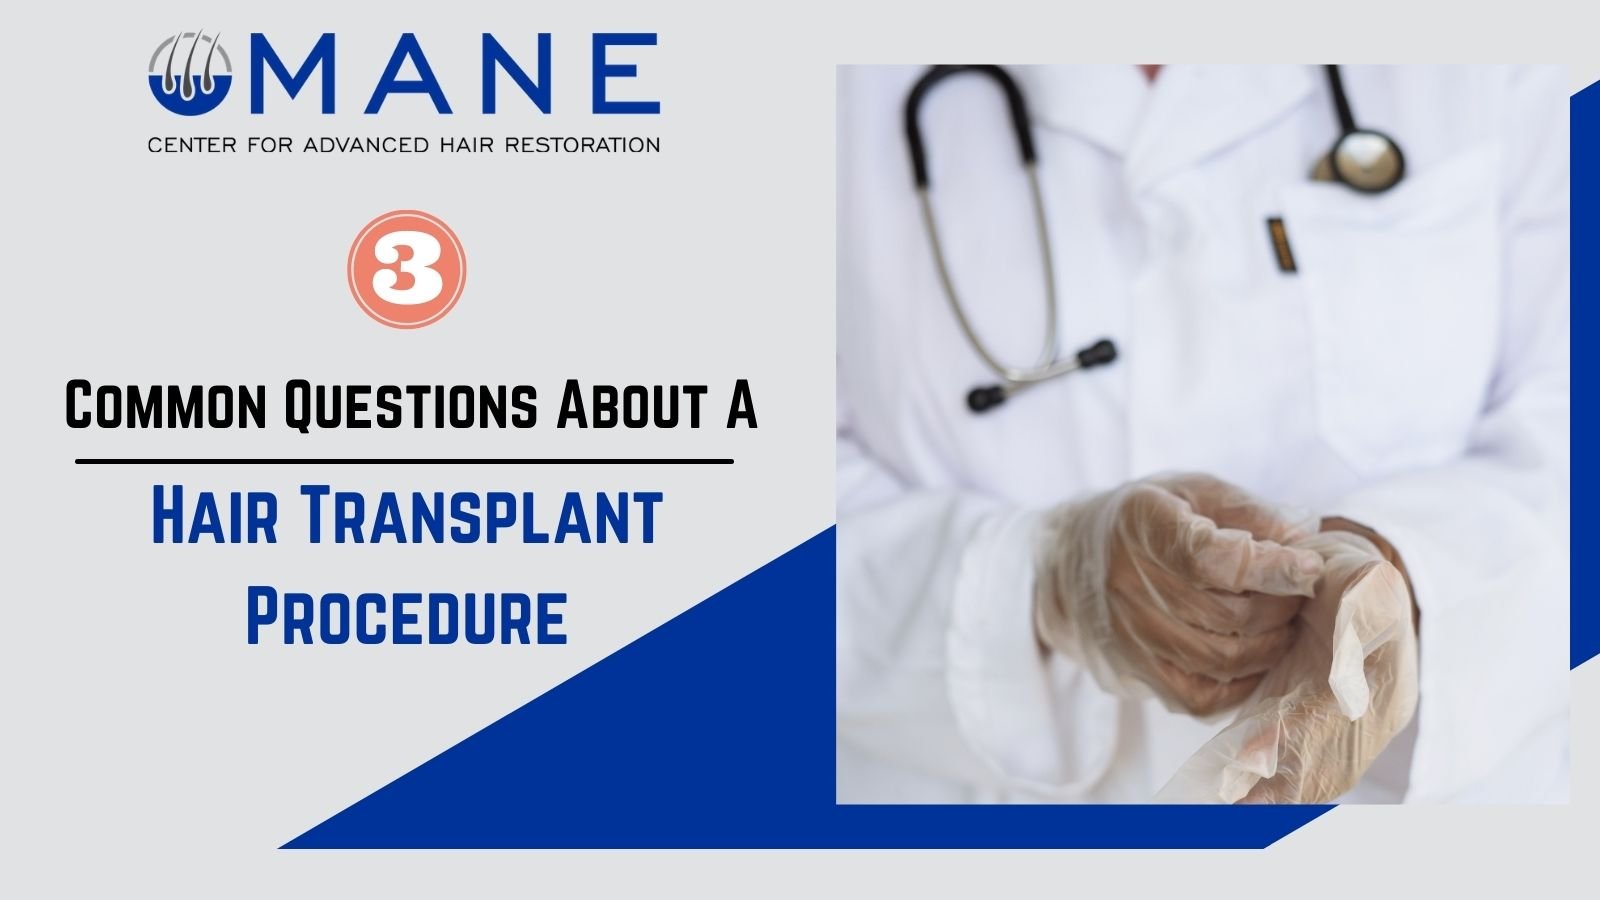 3 Common Questions About A Hair Transplant Procedure